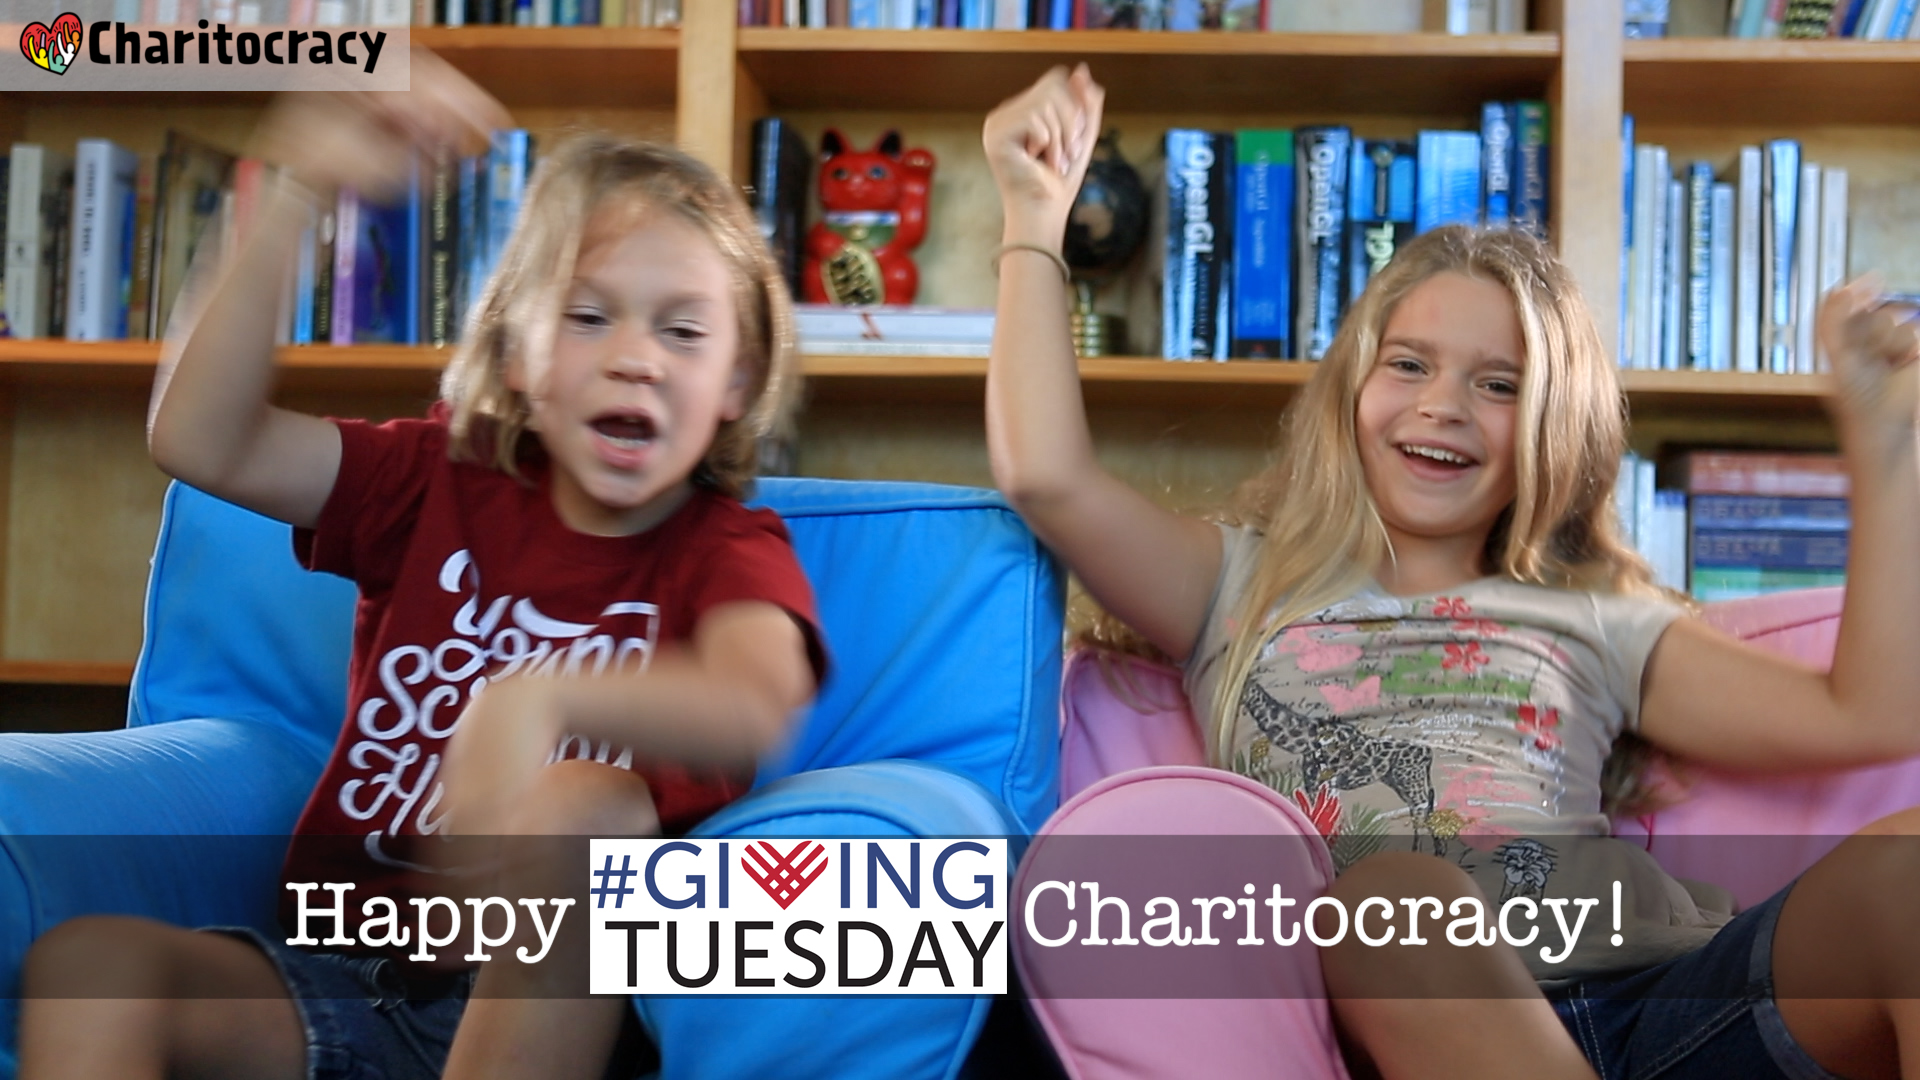 Happy Giving Tuesday, Charitocracy!